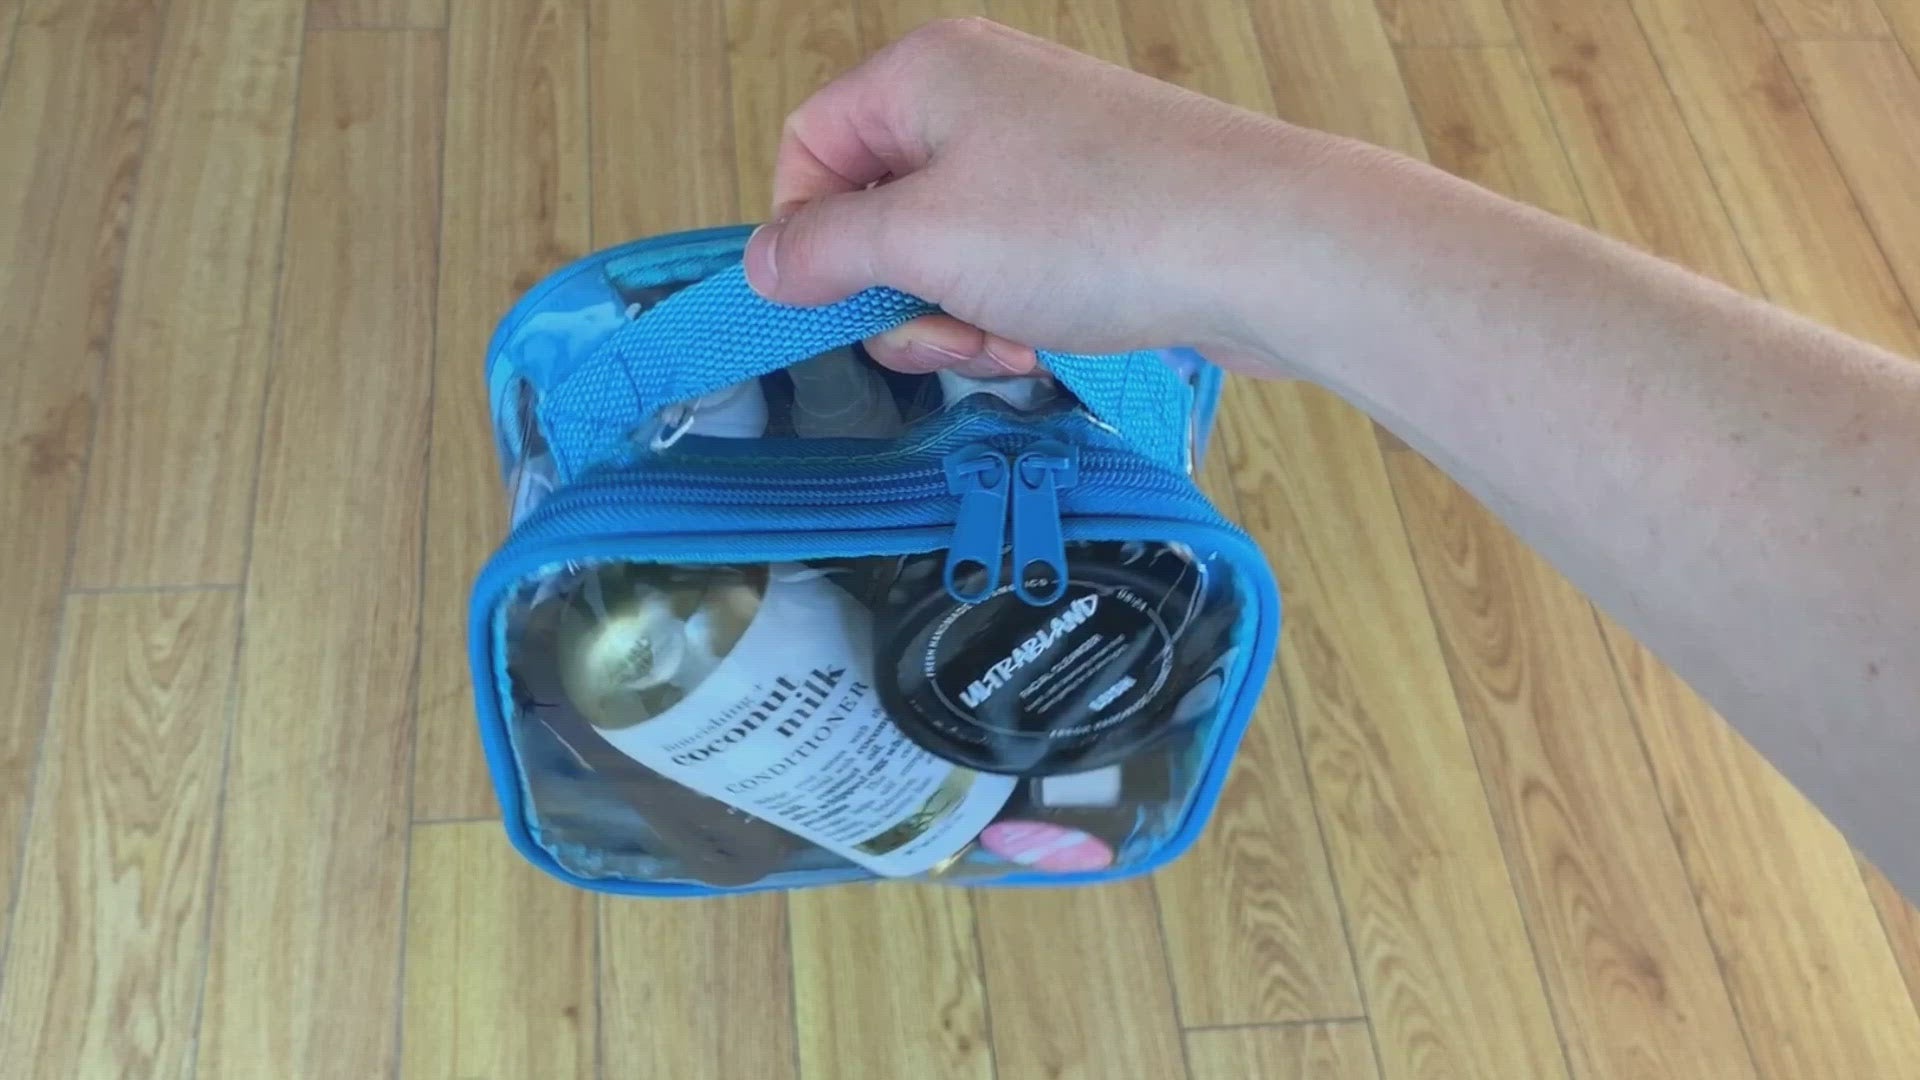 The Best TSA Approved Quart Bag and How to Pack It